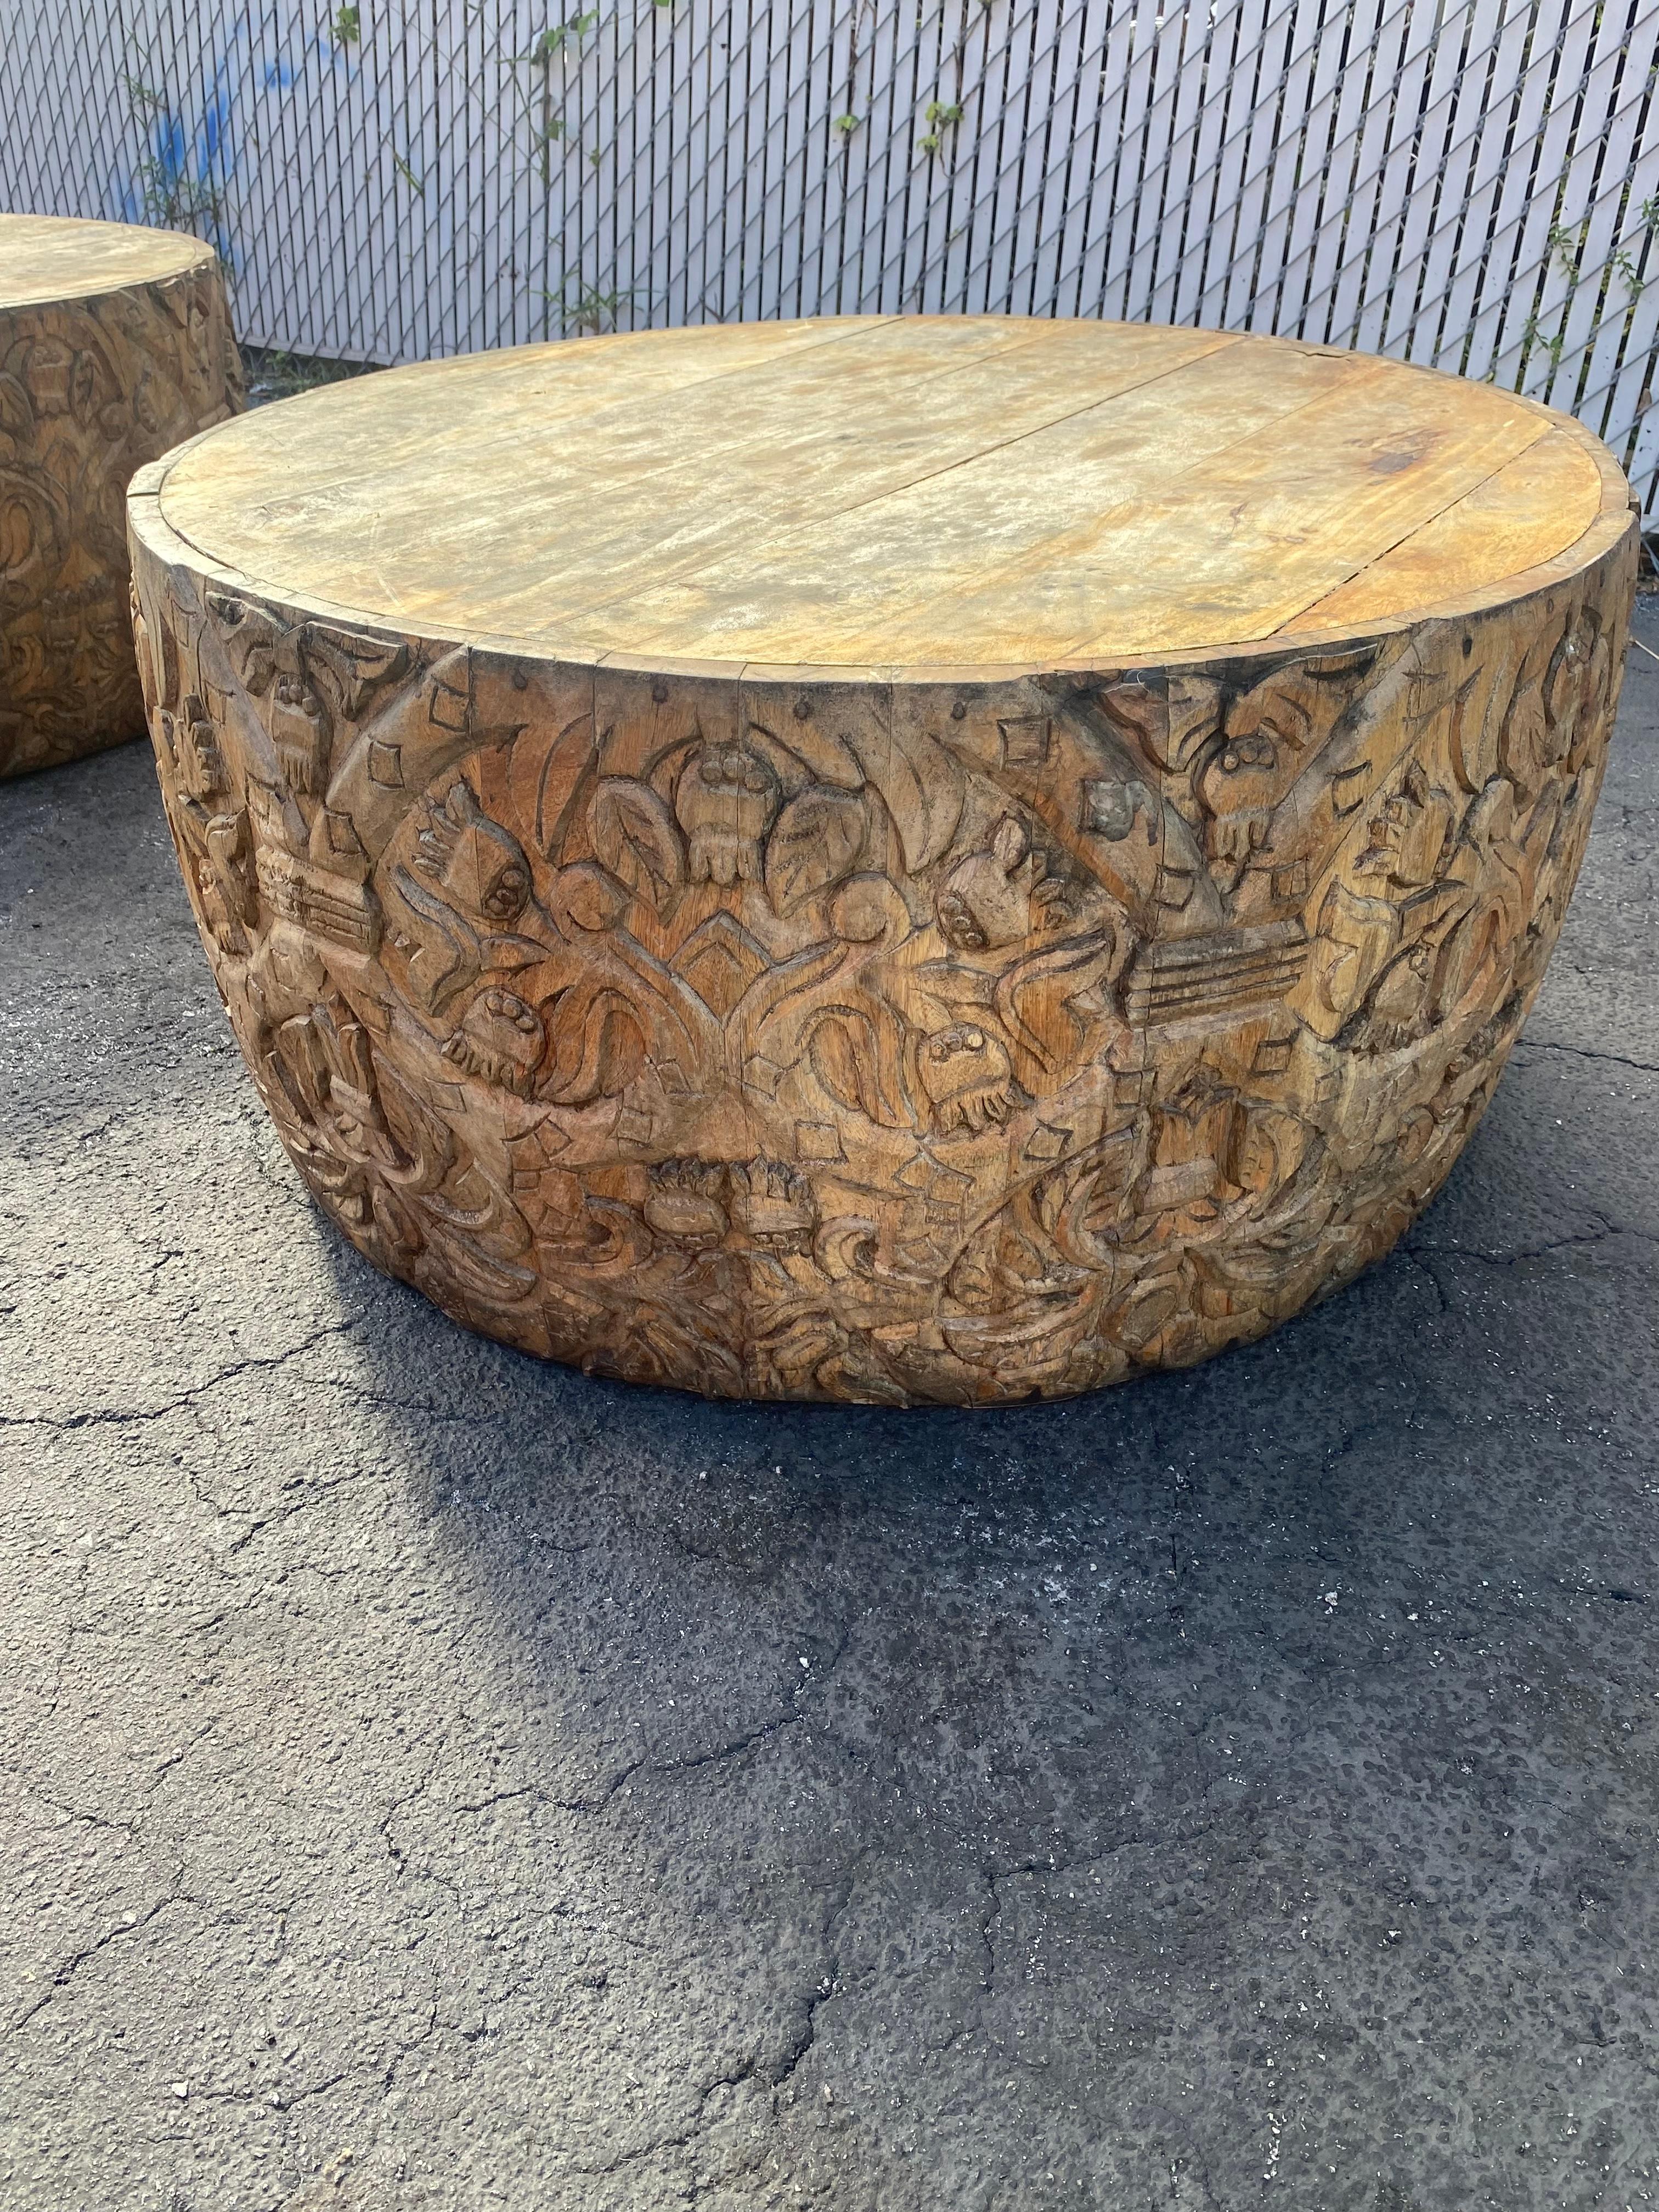 1940s Heavily Carved Teak Gilt Wood Round Drum Coffee Tables, Set of 2 For Sale 2